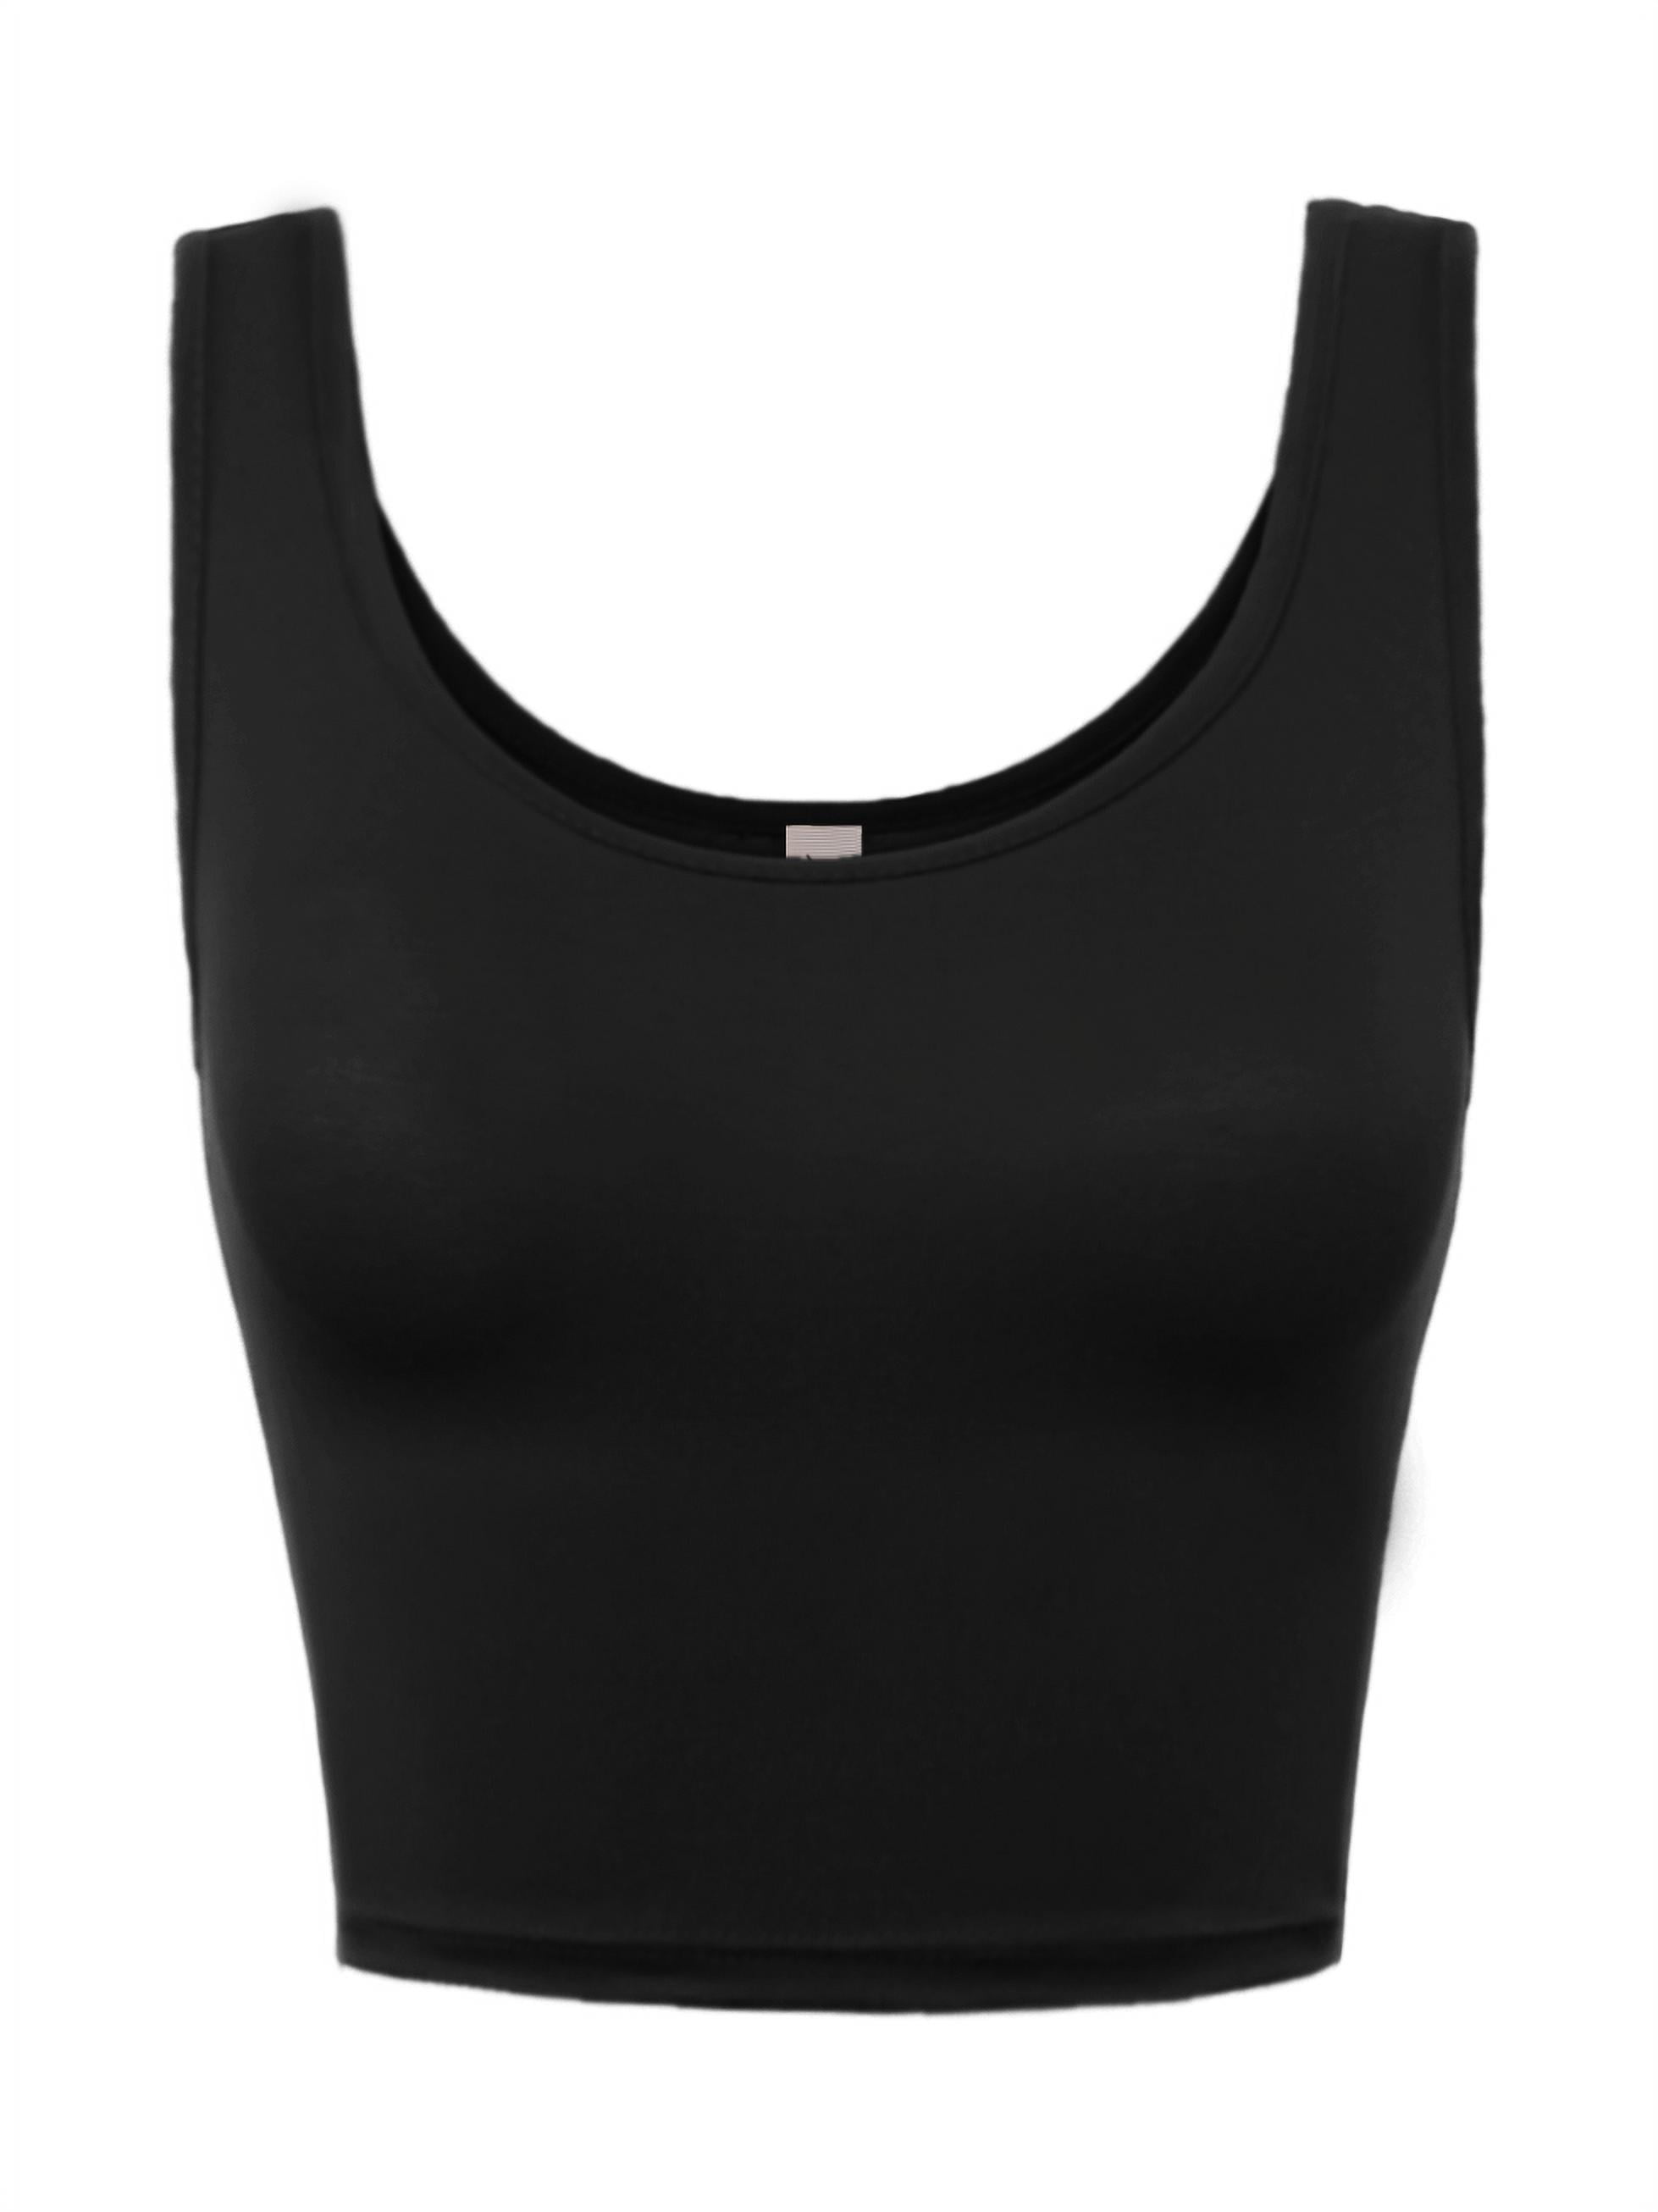 A2Y Women's Fitted Rayon Scoop Neck Sleeveless Crop Tank Top Black M